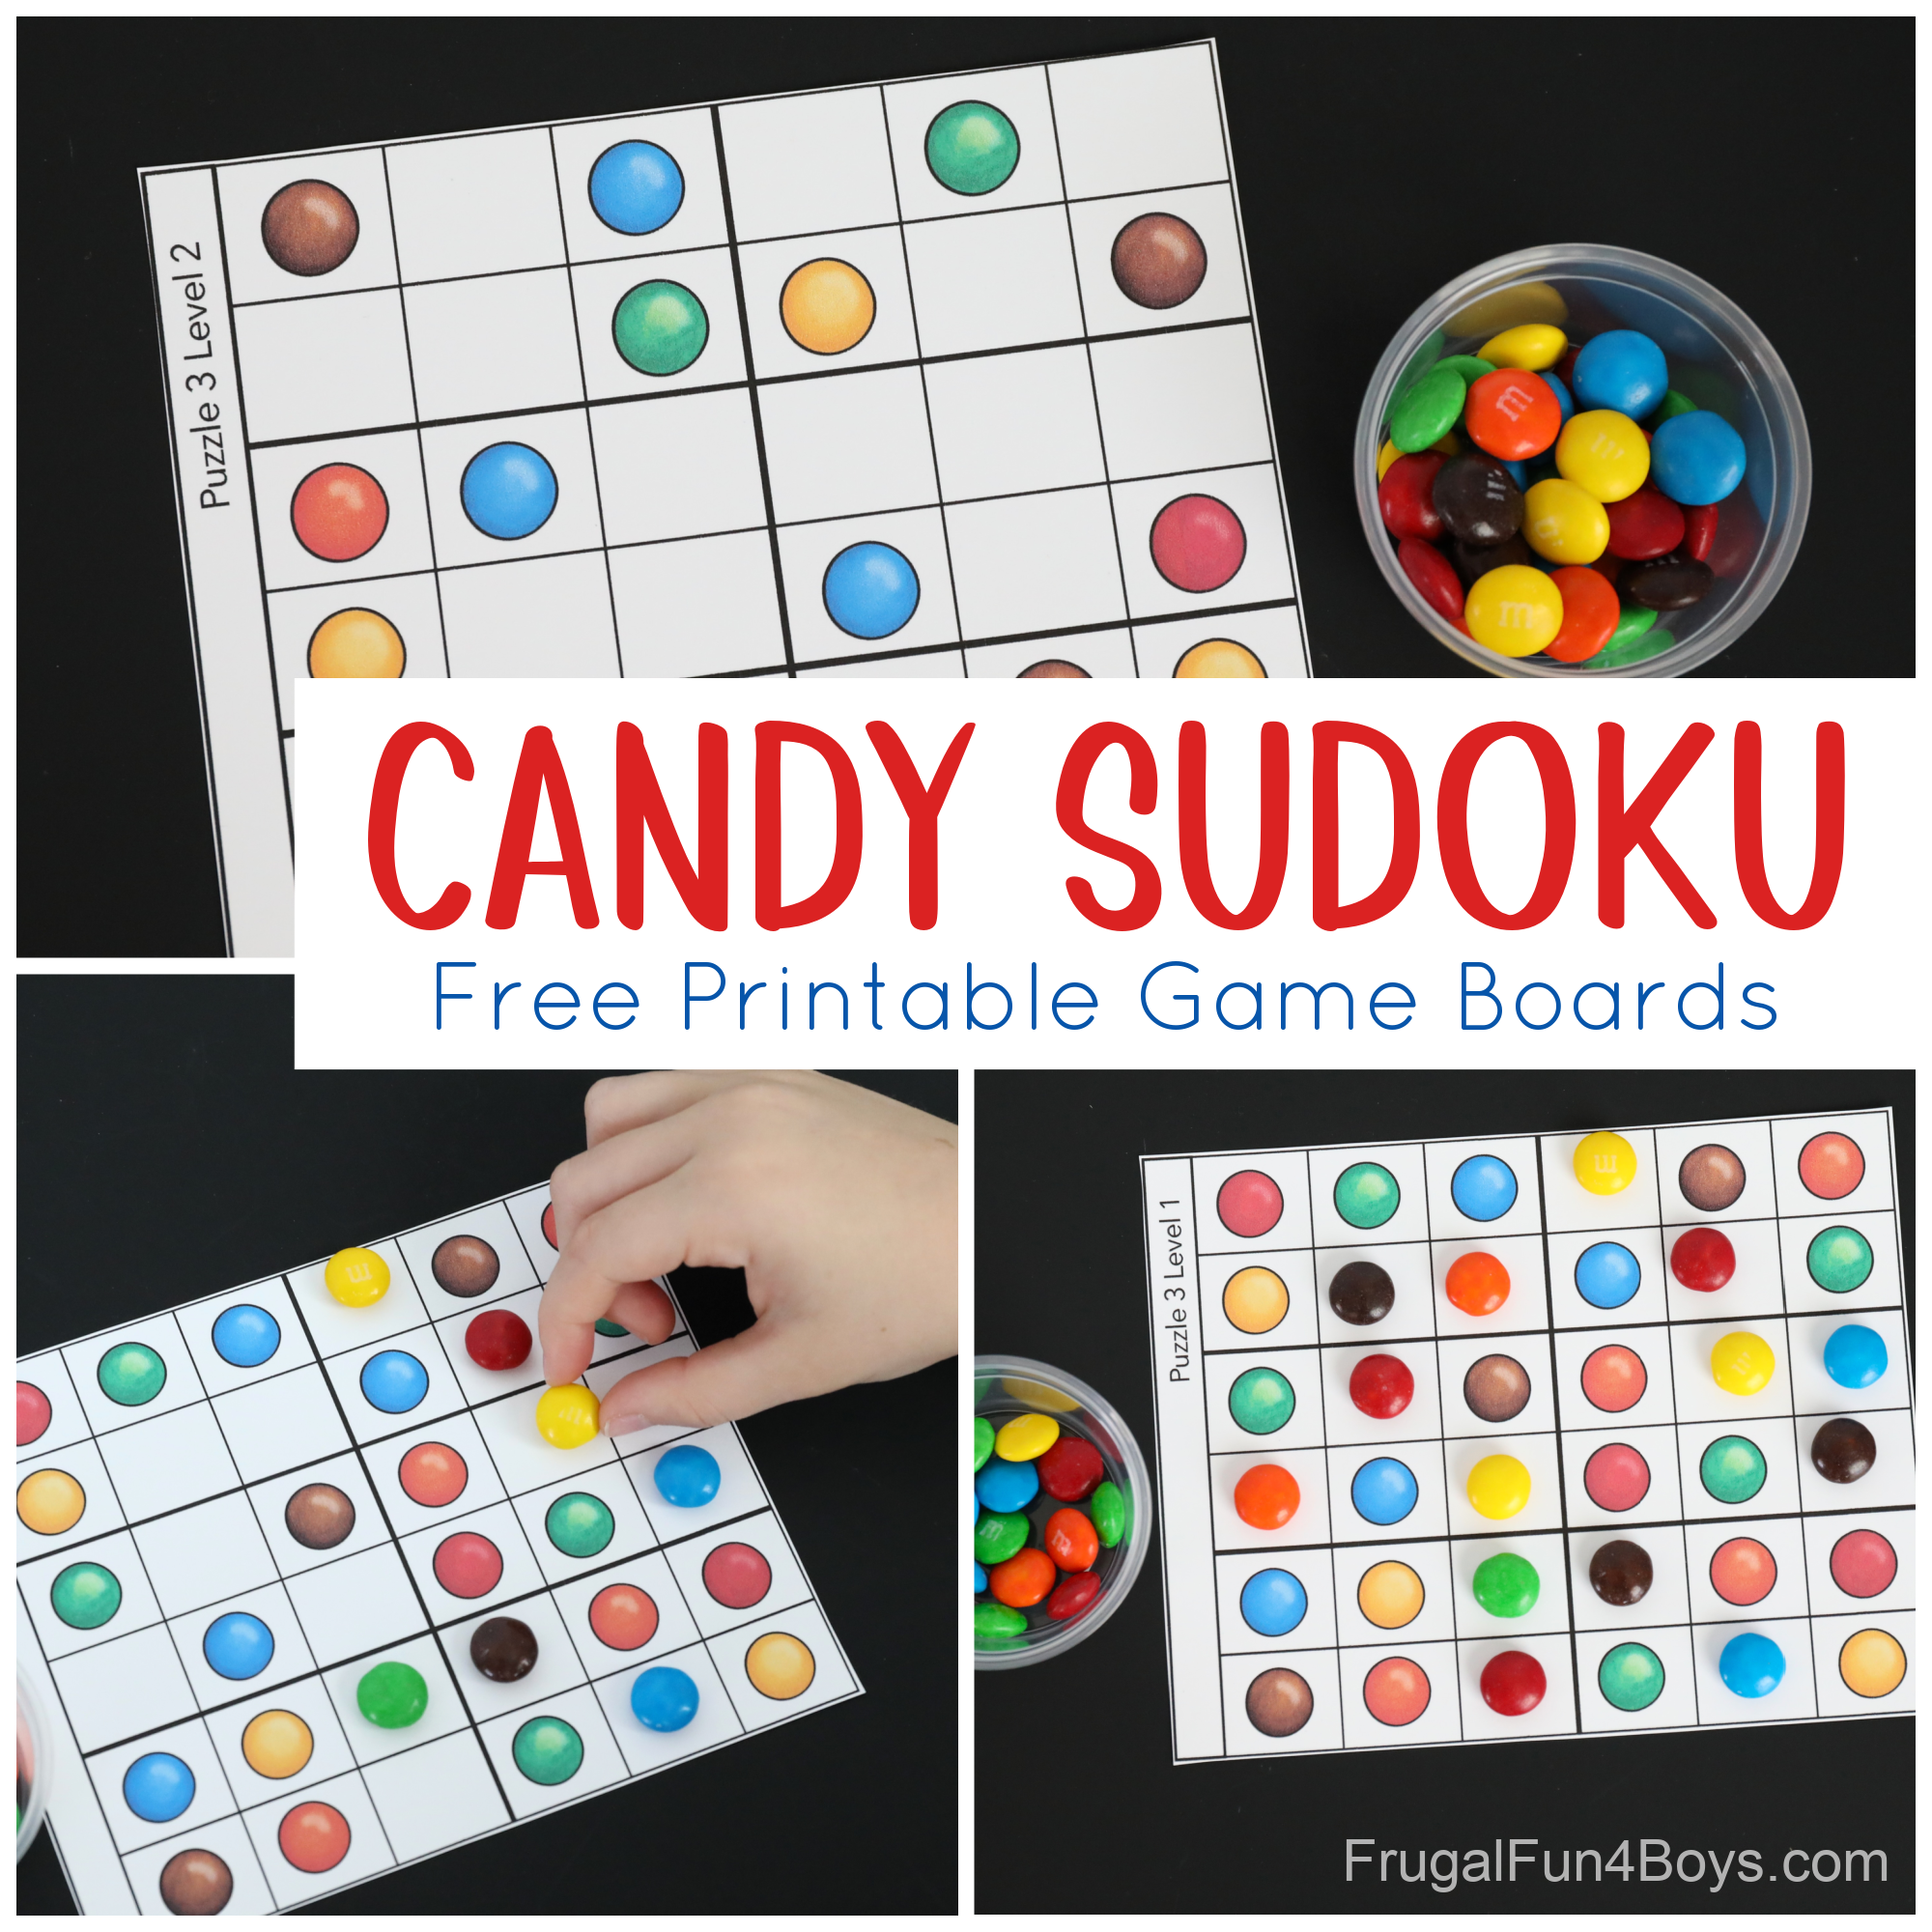 Play a free game of Sudoku online